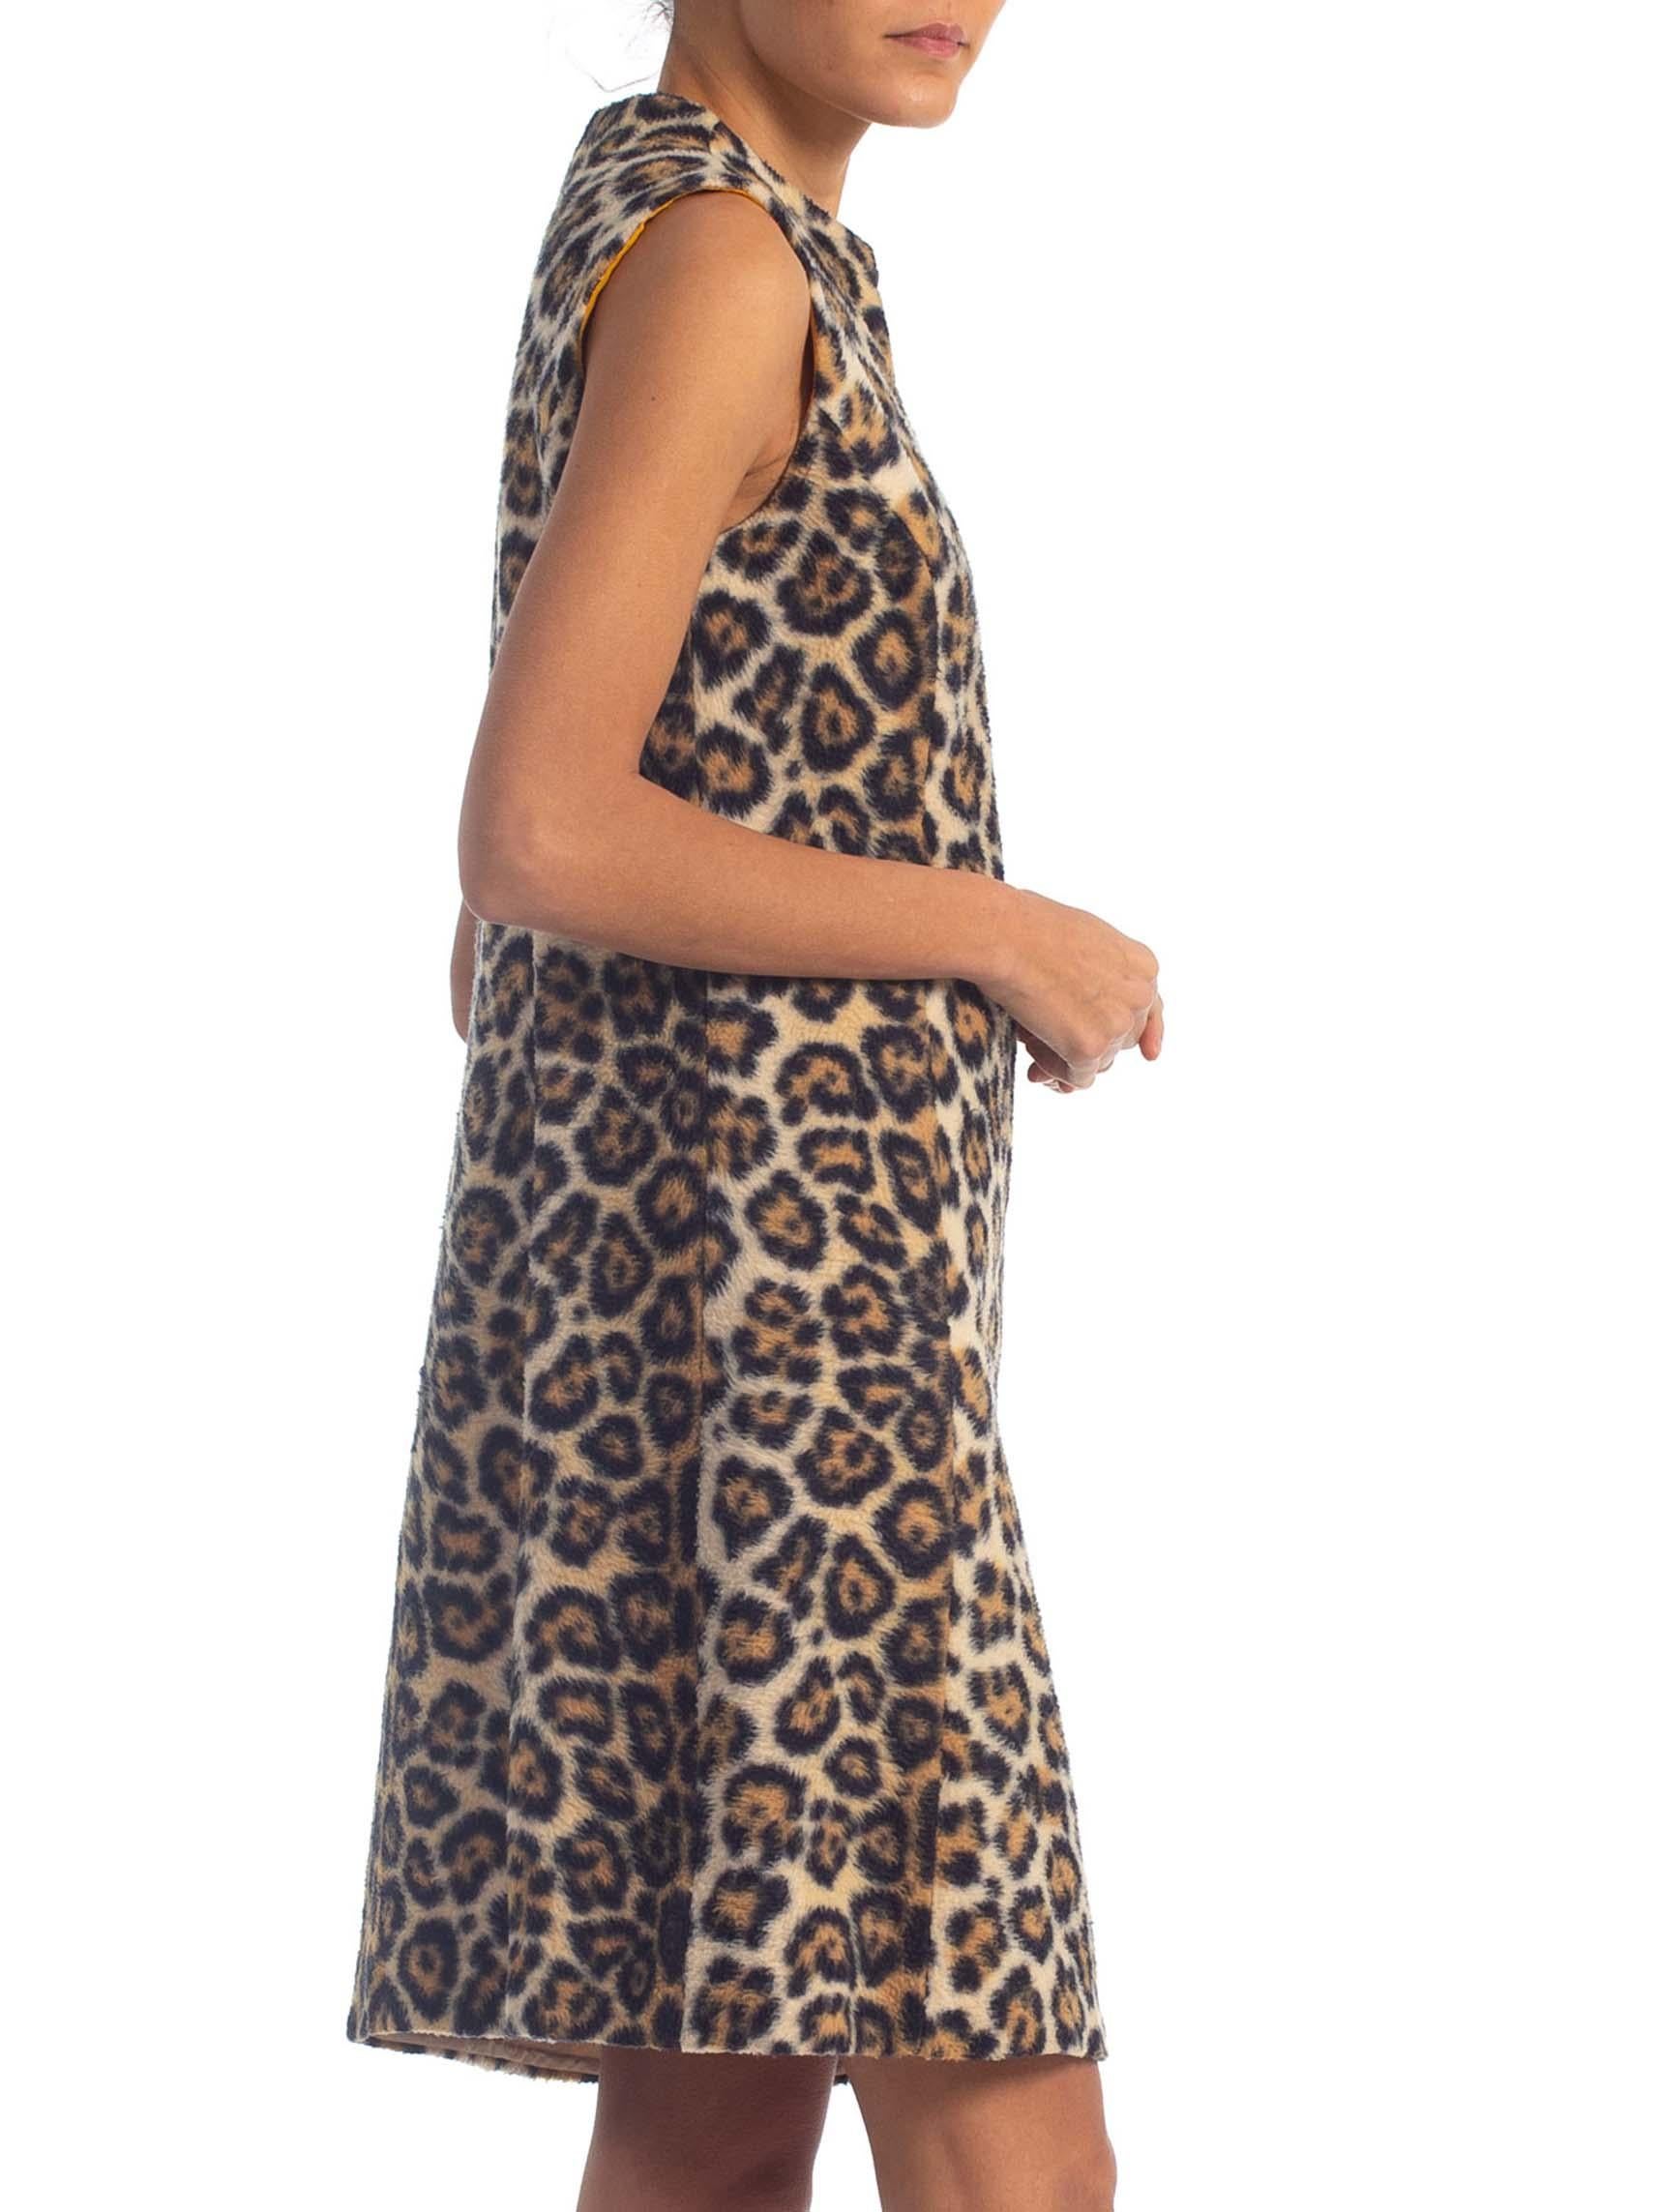 1960S Acrylic Blend Faux Fur Leopard Dress In Excellent Condition For Sale In New York, NY